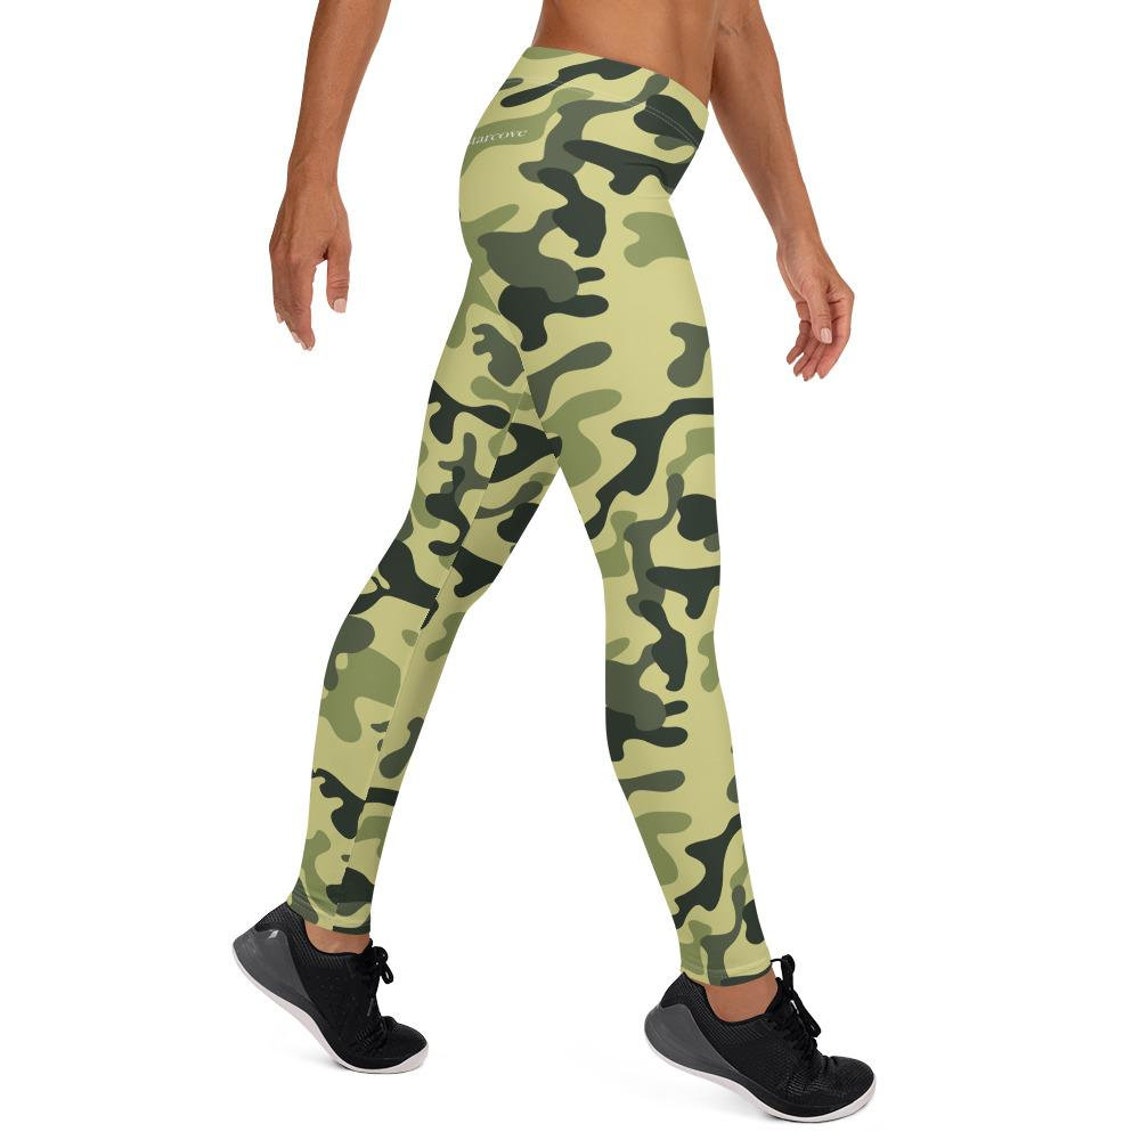 Green Sand Army Camouflage Workout Pants Womens Leggings Camo | Etsy